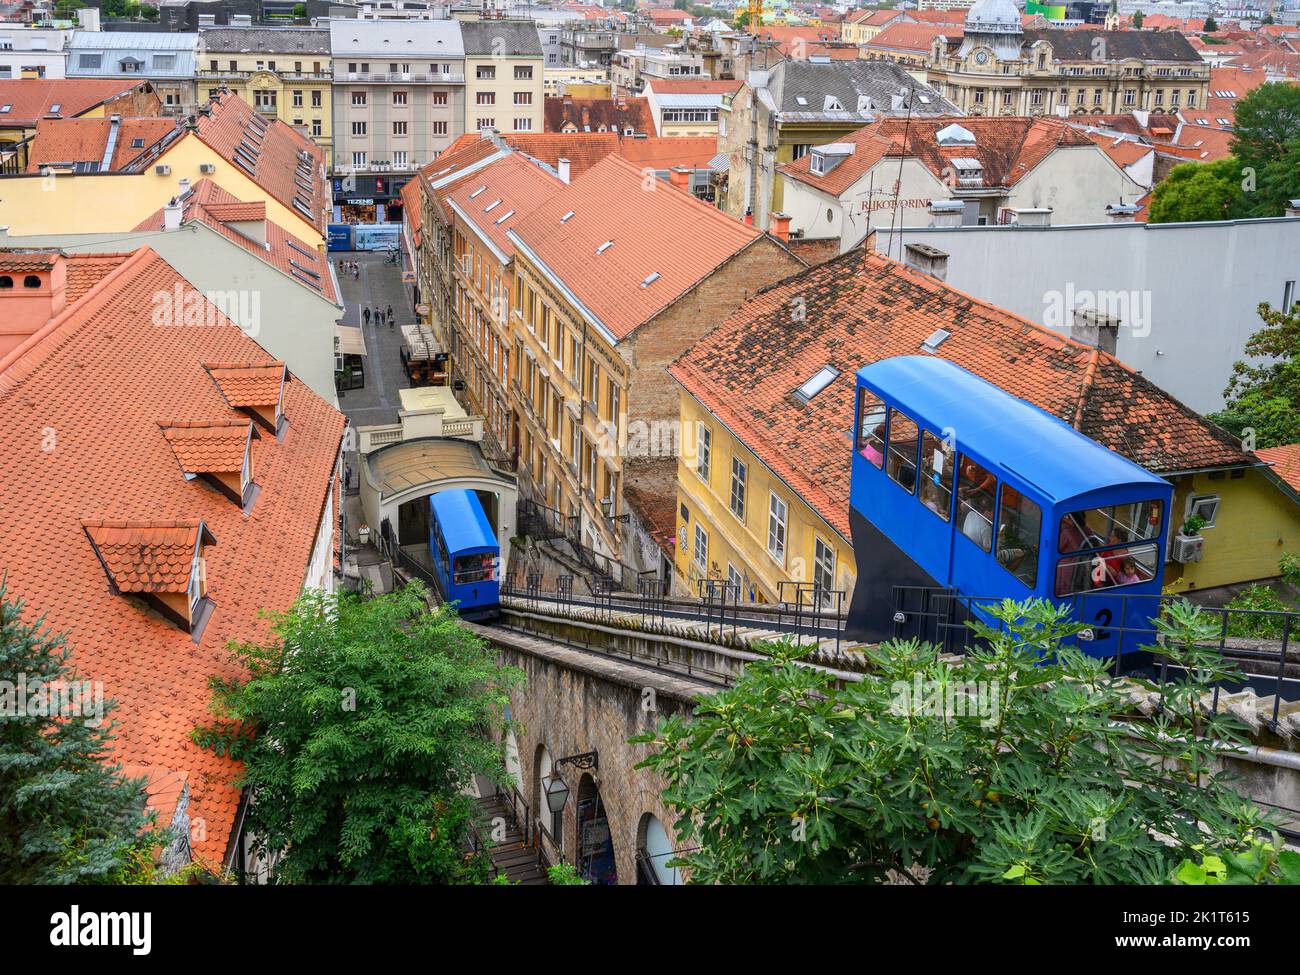 Historic funicular railway connecting the Upper and Lower towns, Zagreb, Croatia Stock Photo